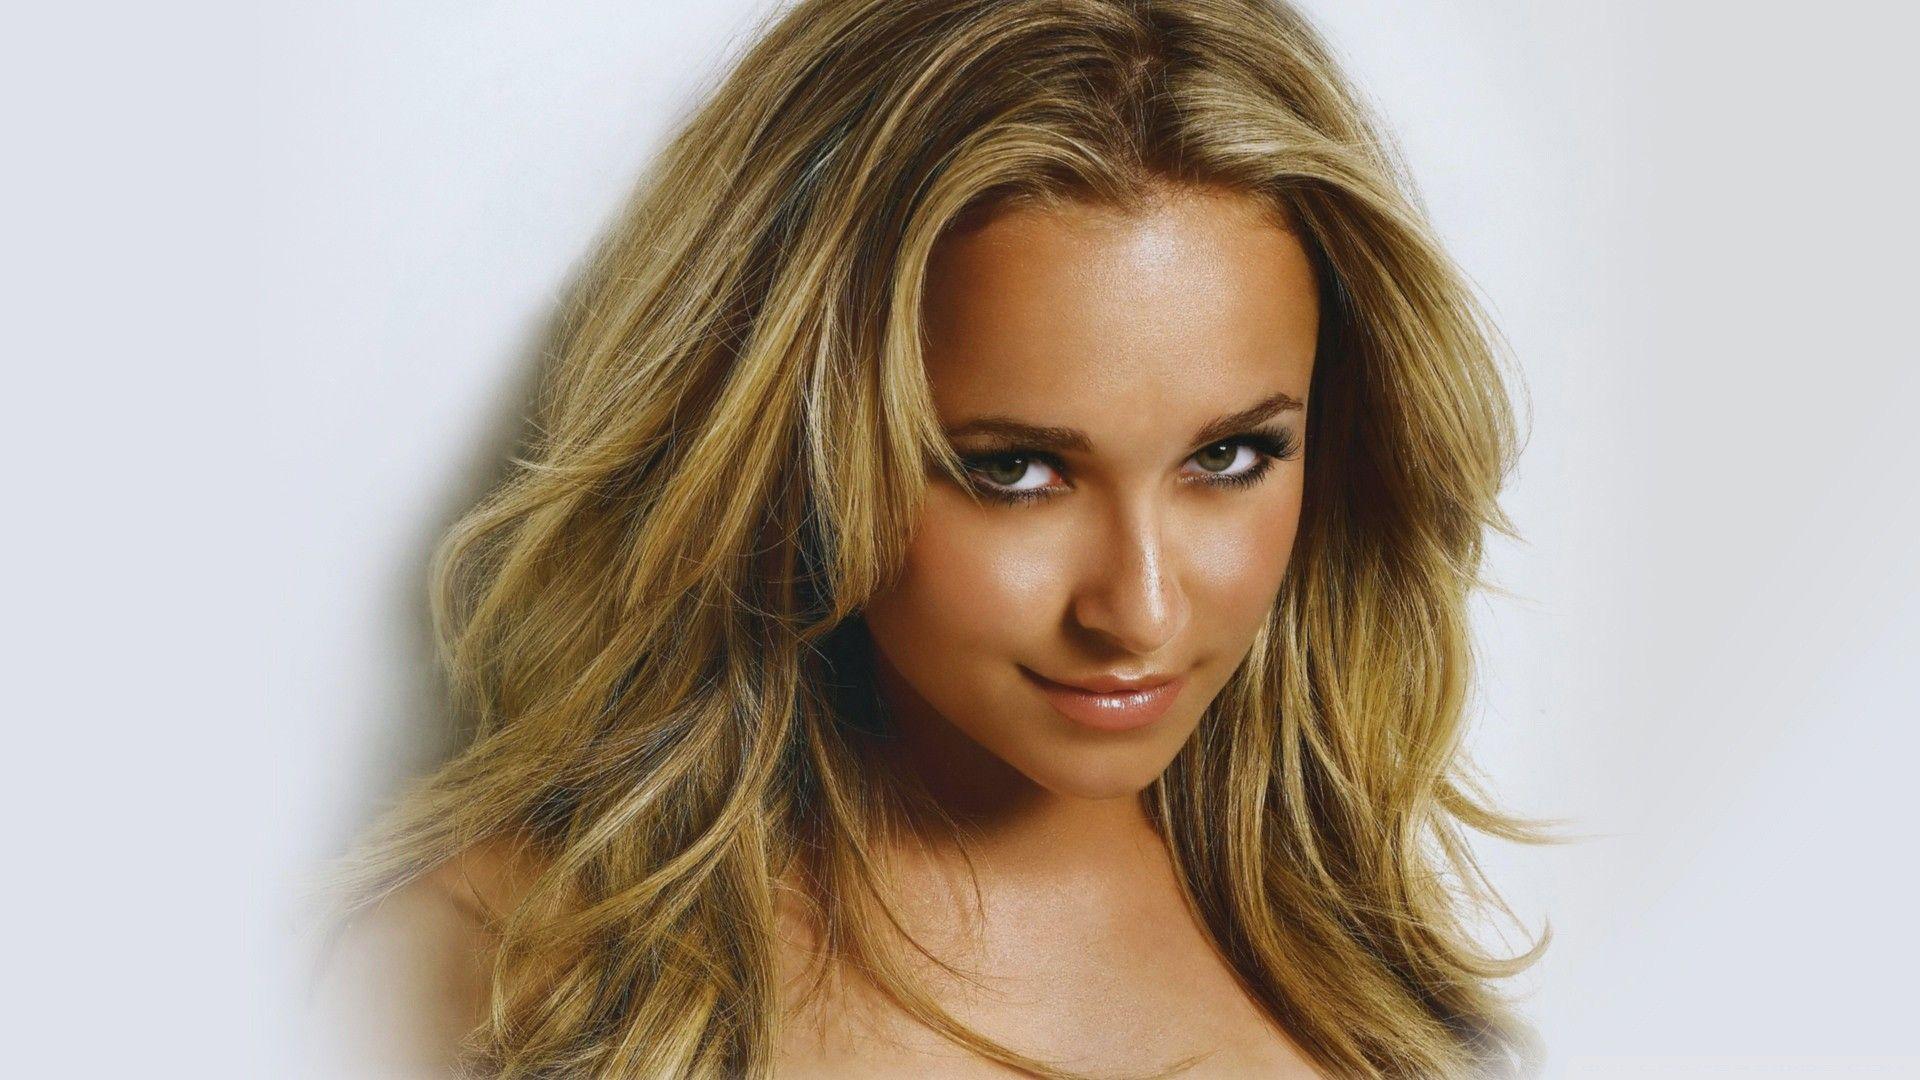 Hayden Panettiere Full HD Wallpaper and Background Imagex1080